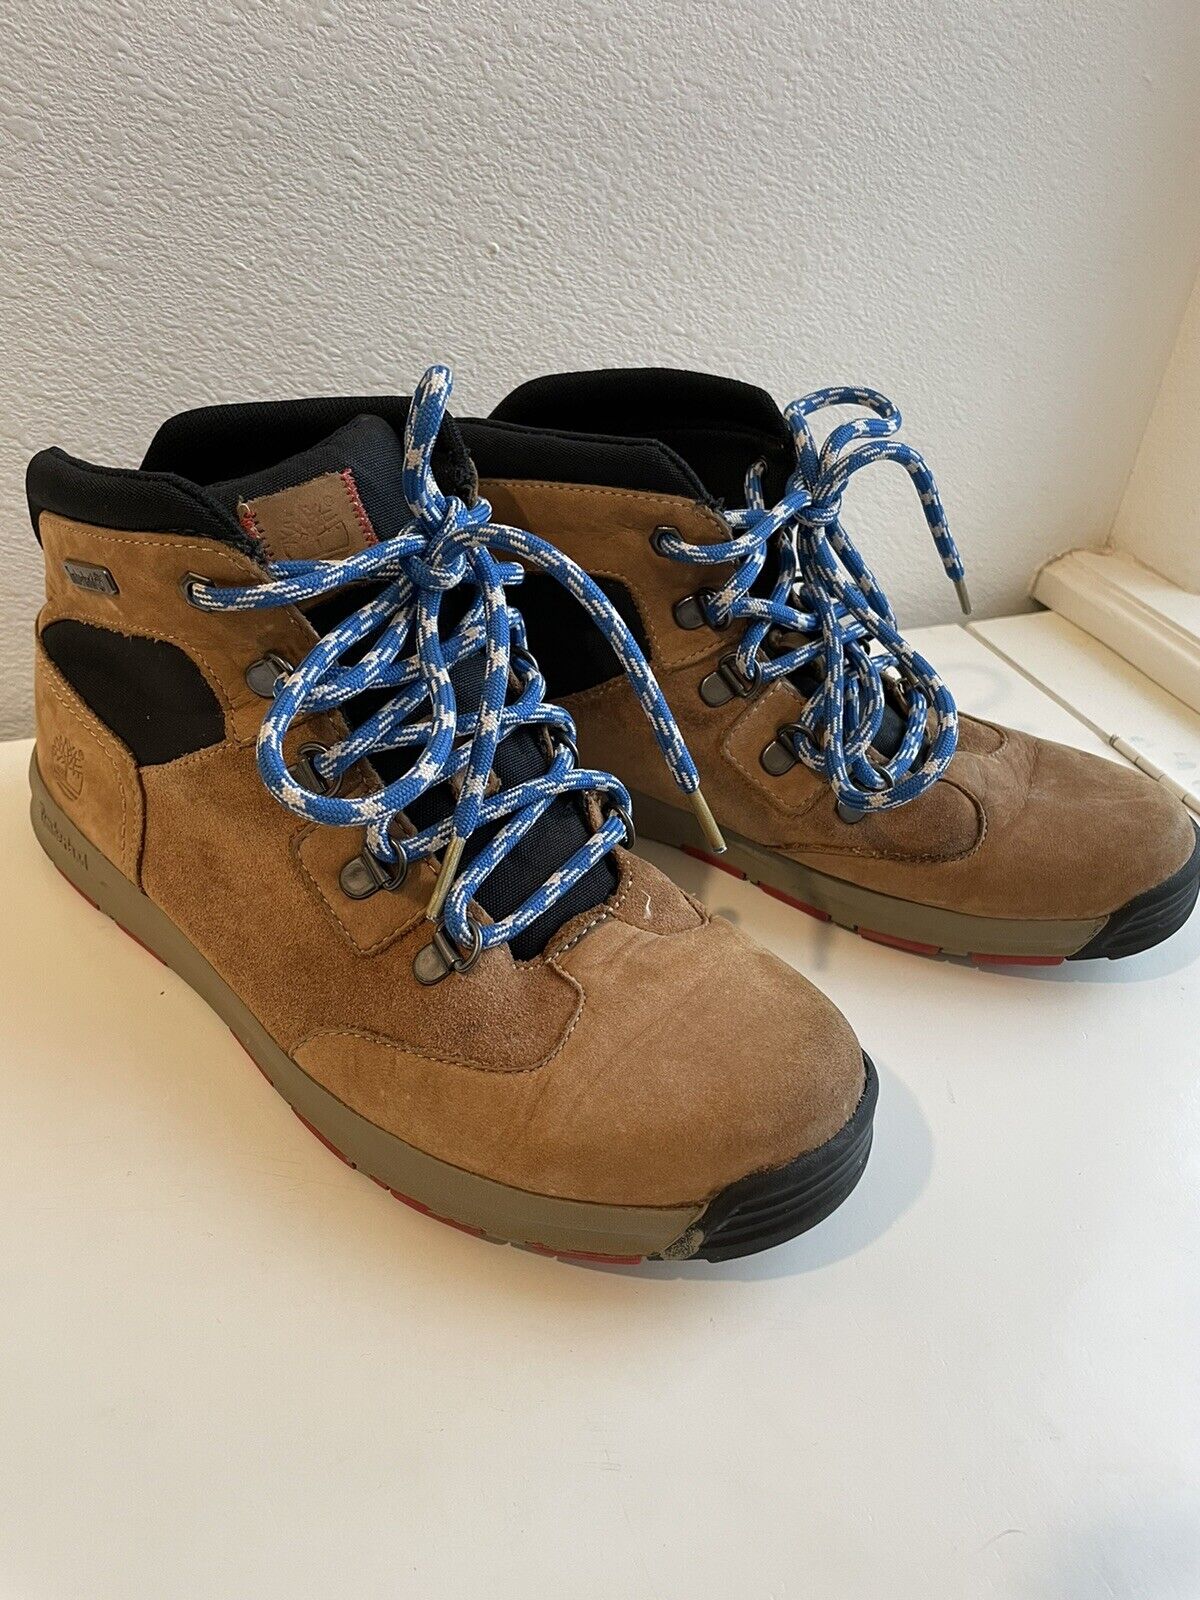 Irónico me quejo Luna Timberland Scramble Earthkeepers Midwheat Boots Boys Size 6.5 Tan Hiking  Outdoor | eBay